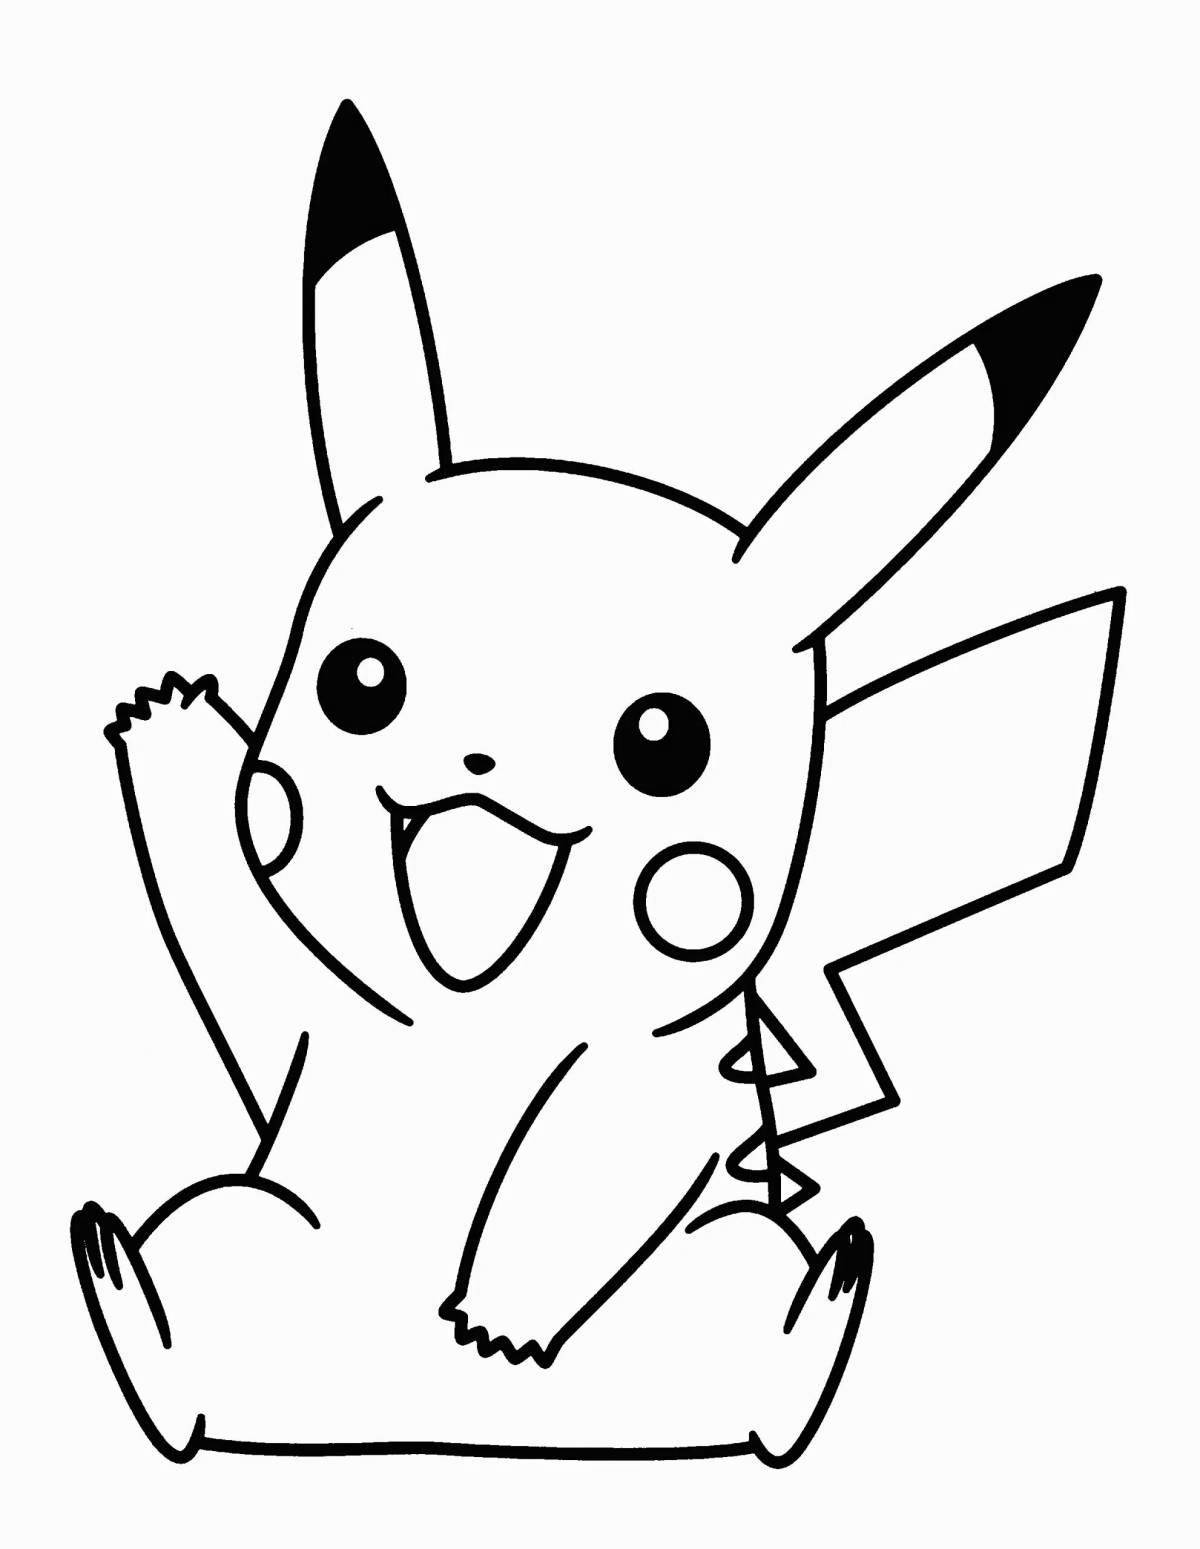 Attractive pikachu seal coloring page